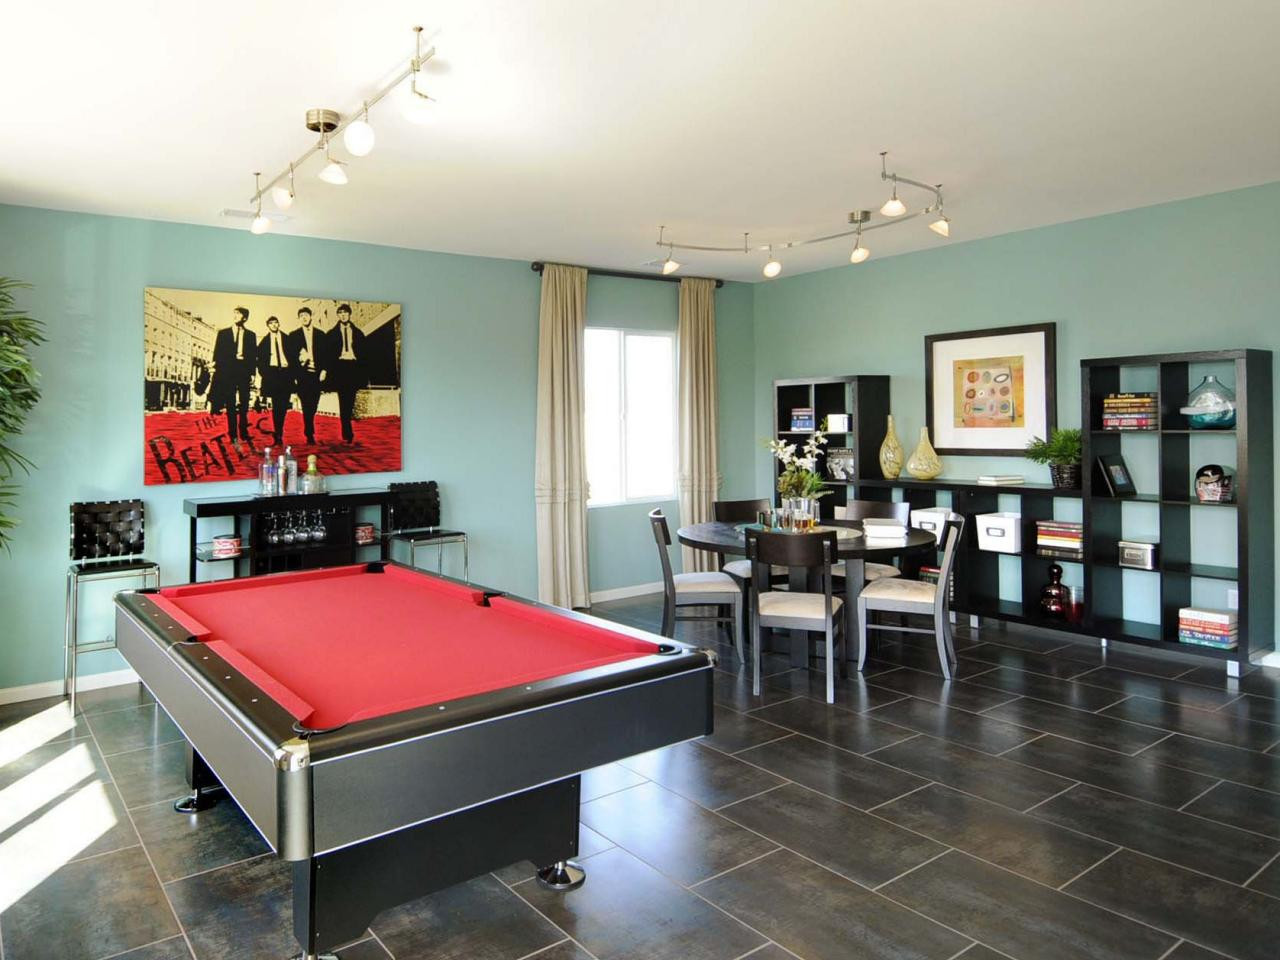 Fun Ideas For Adults
 A Game Room for Adult That Will Make Your Leisure Time